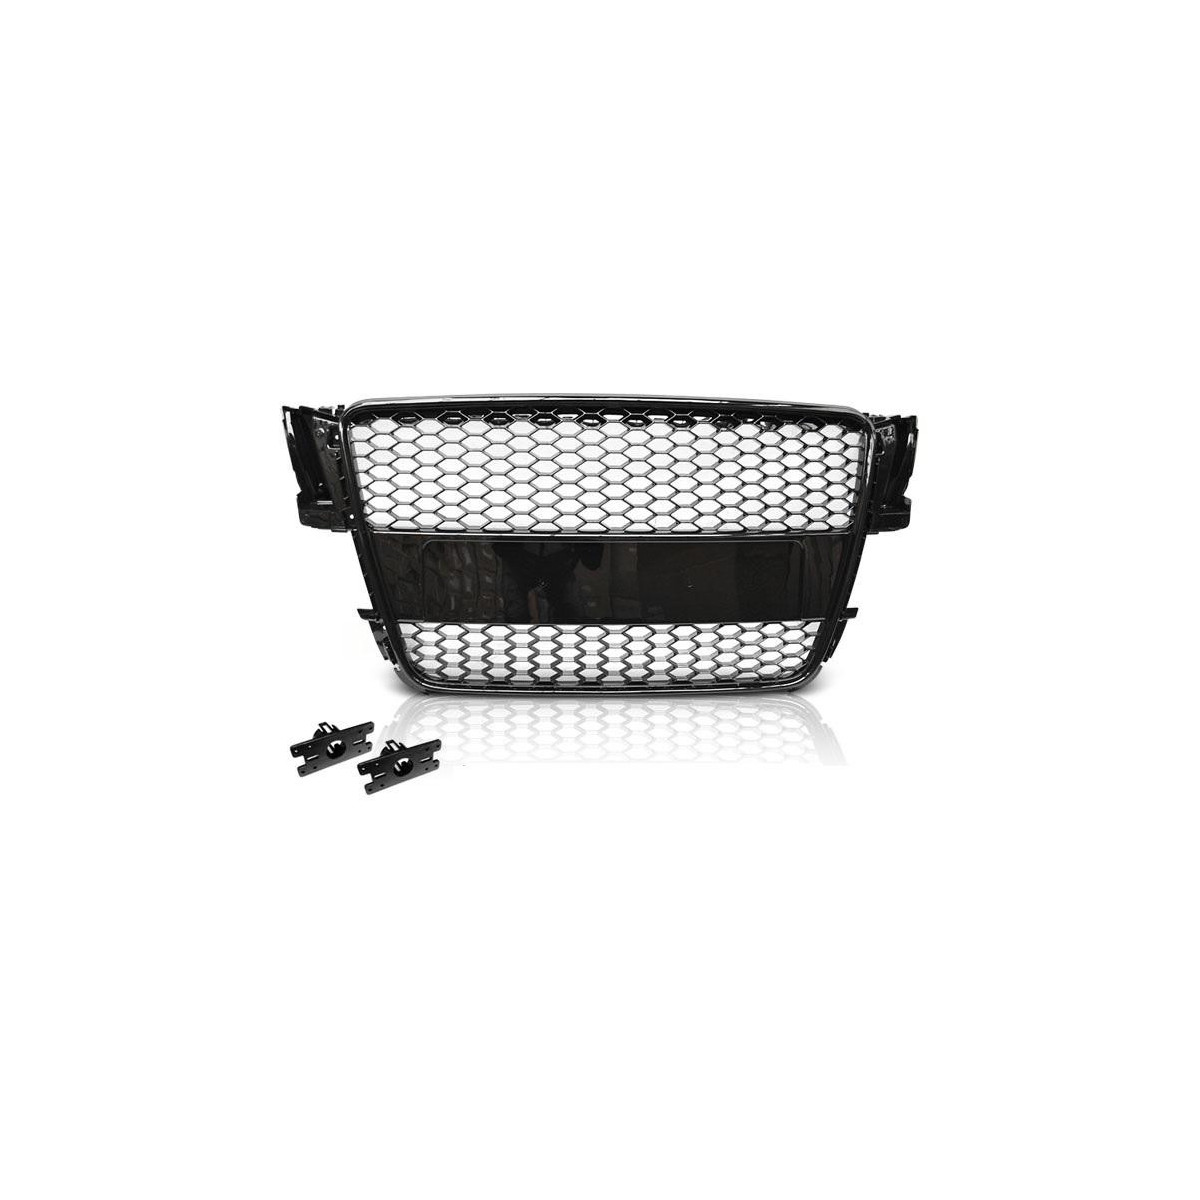 GRILL AUDI A5 07-06.11 GLOSSY BLACK RS-STYLE